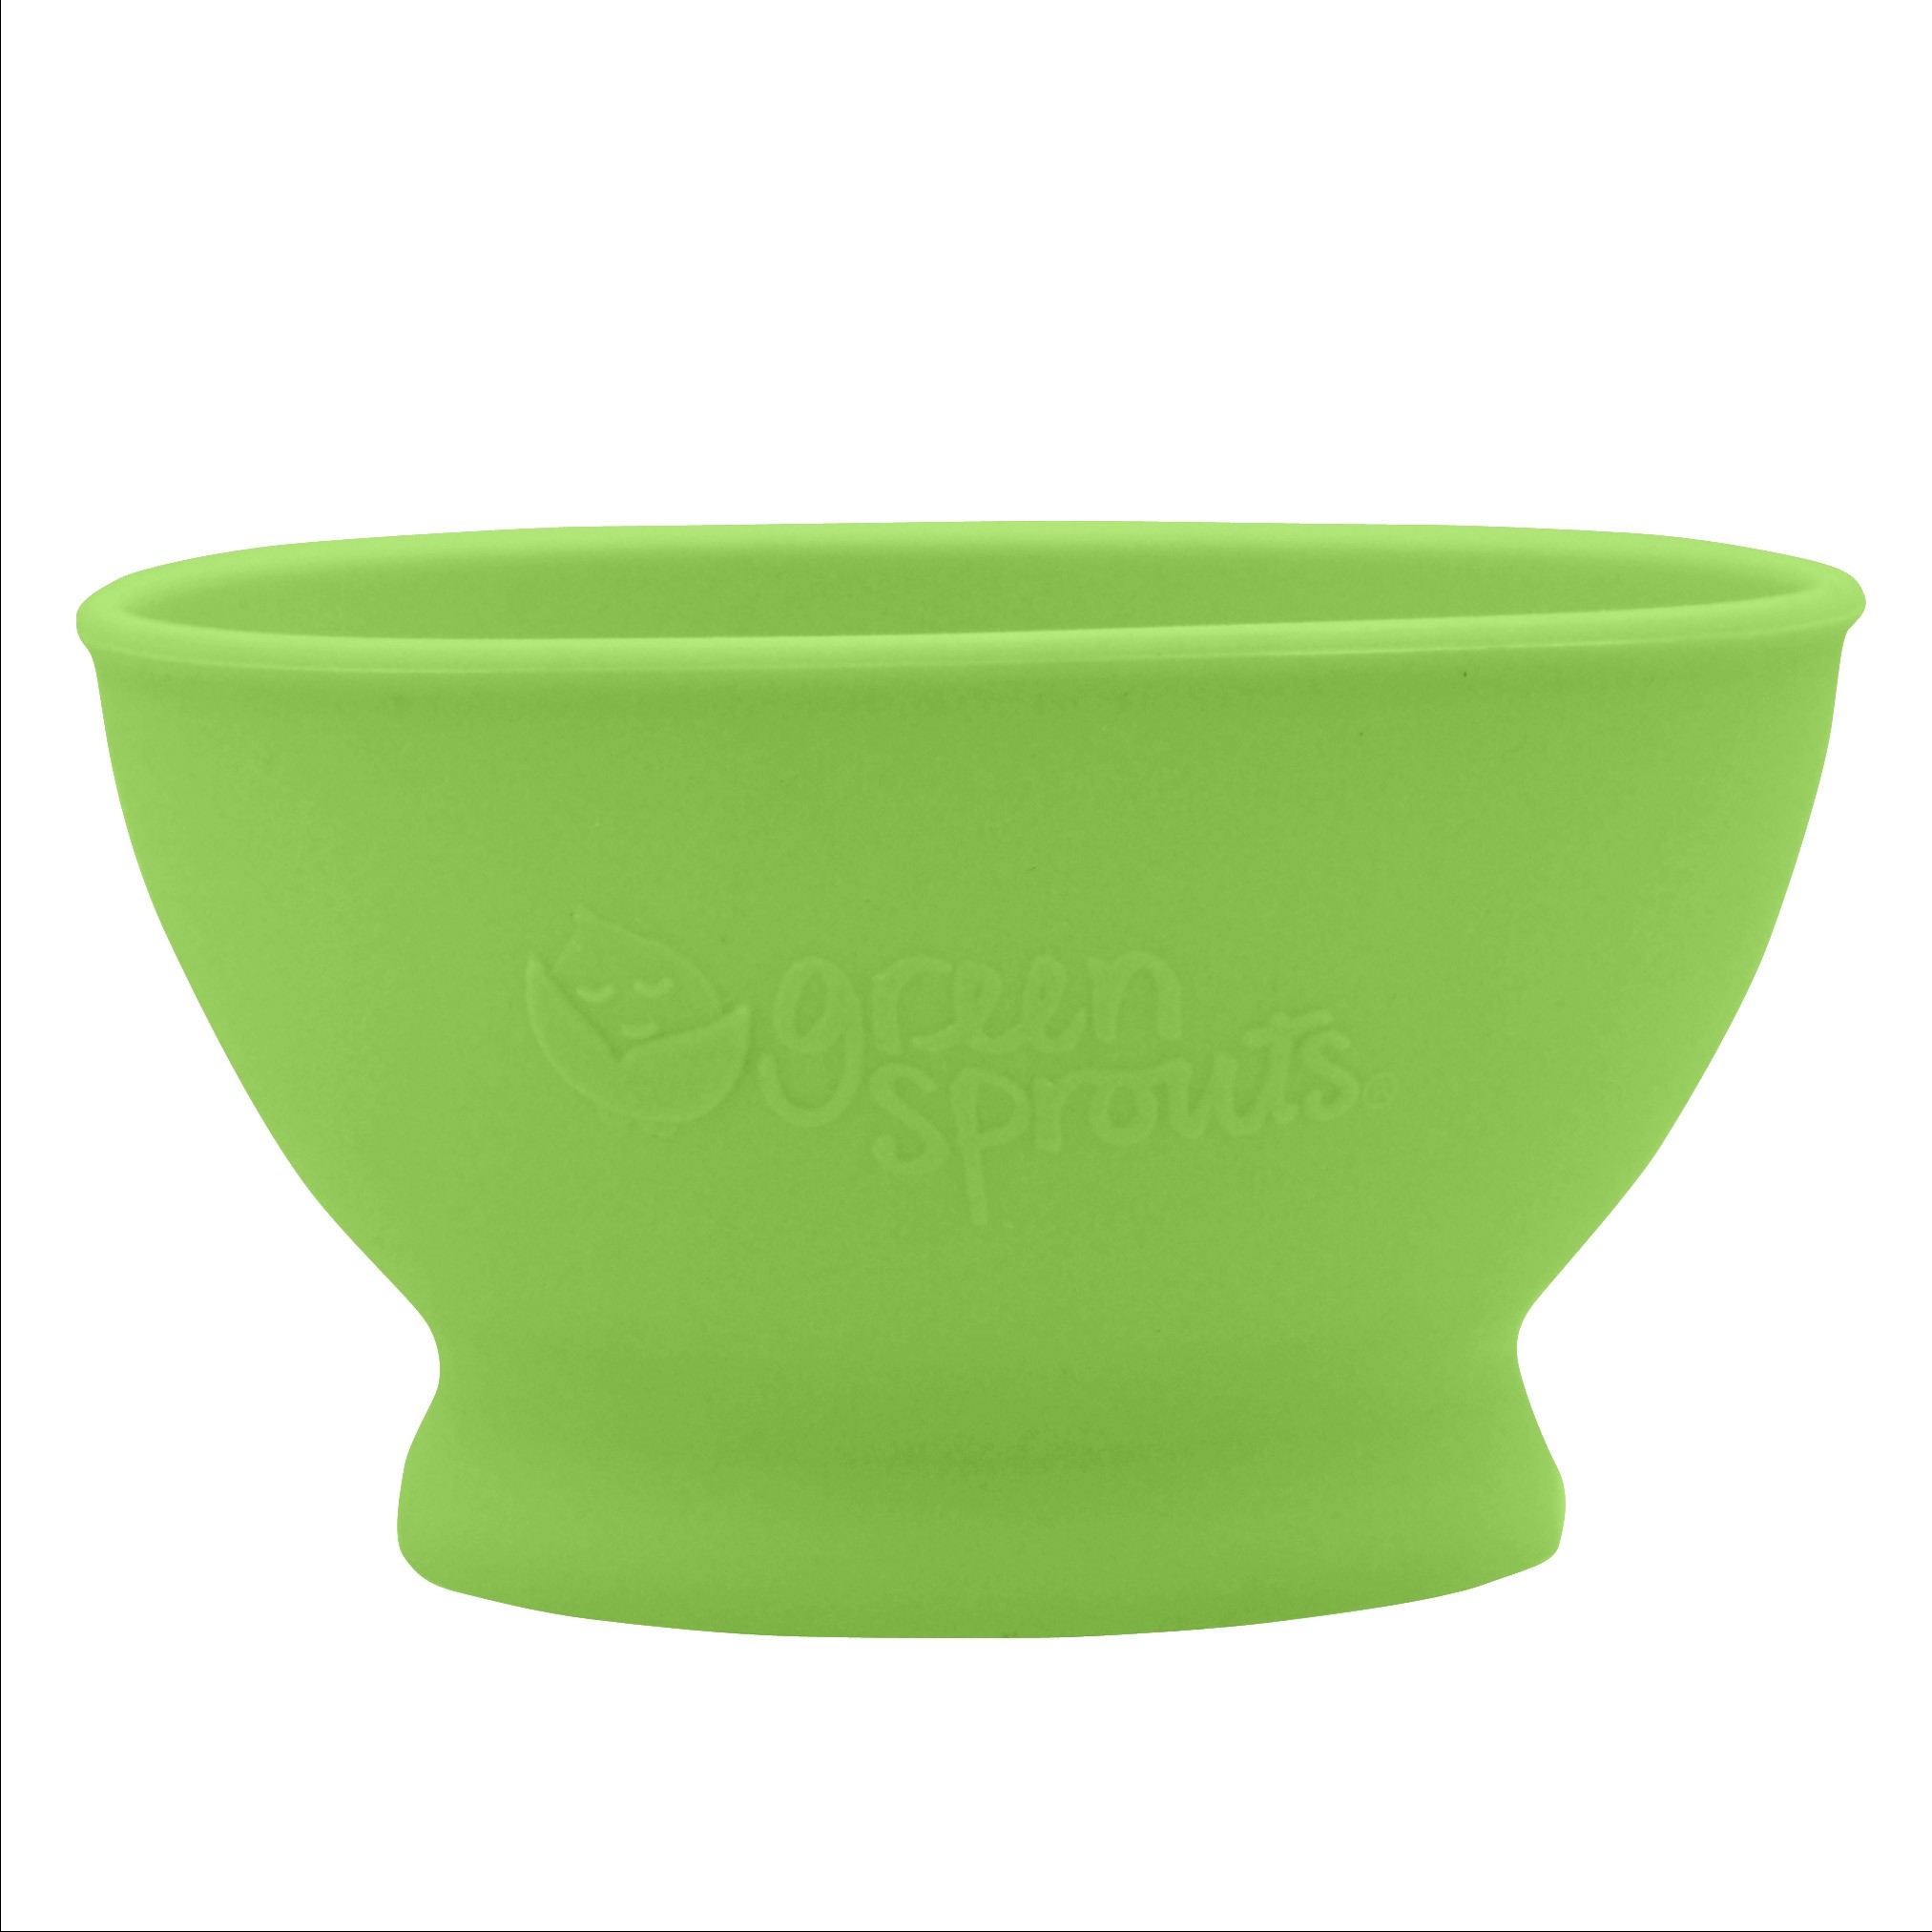 green sprouts Learning Bowl-Green-6mo+ - image 1 of 11